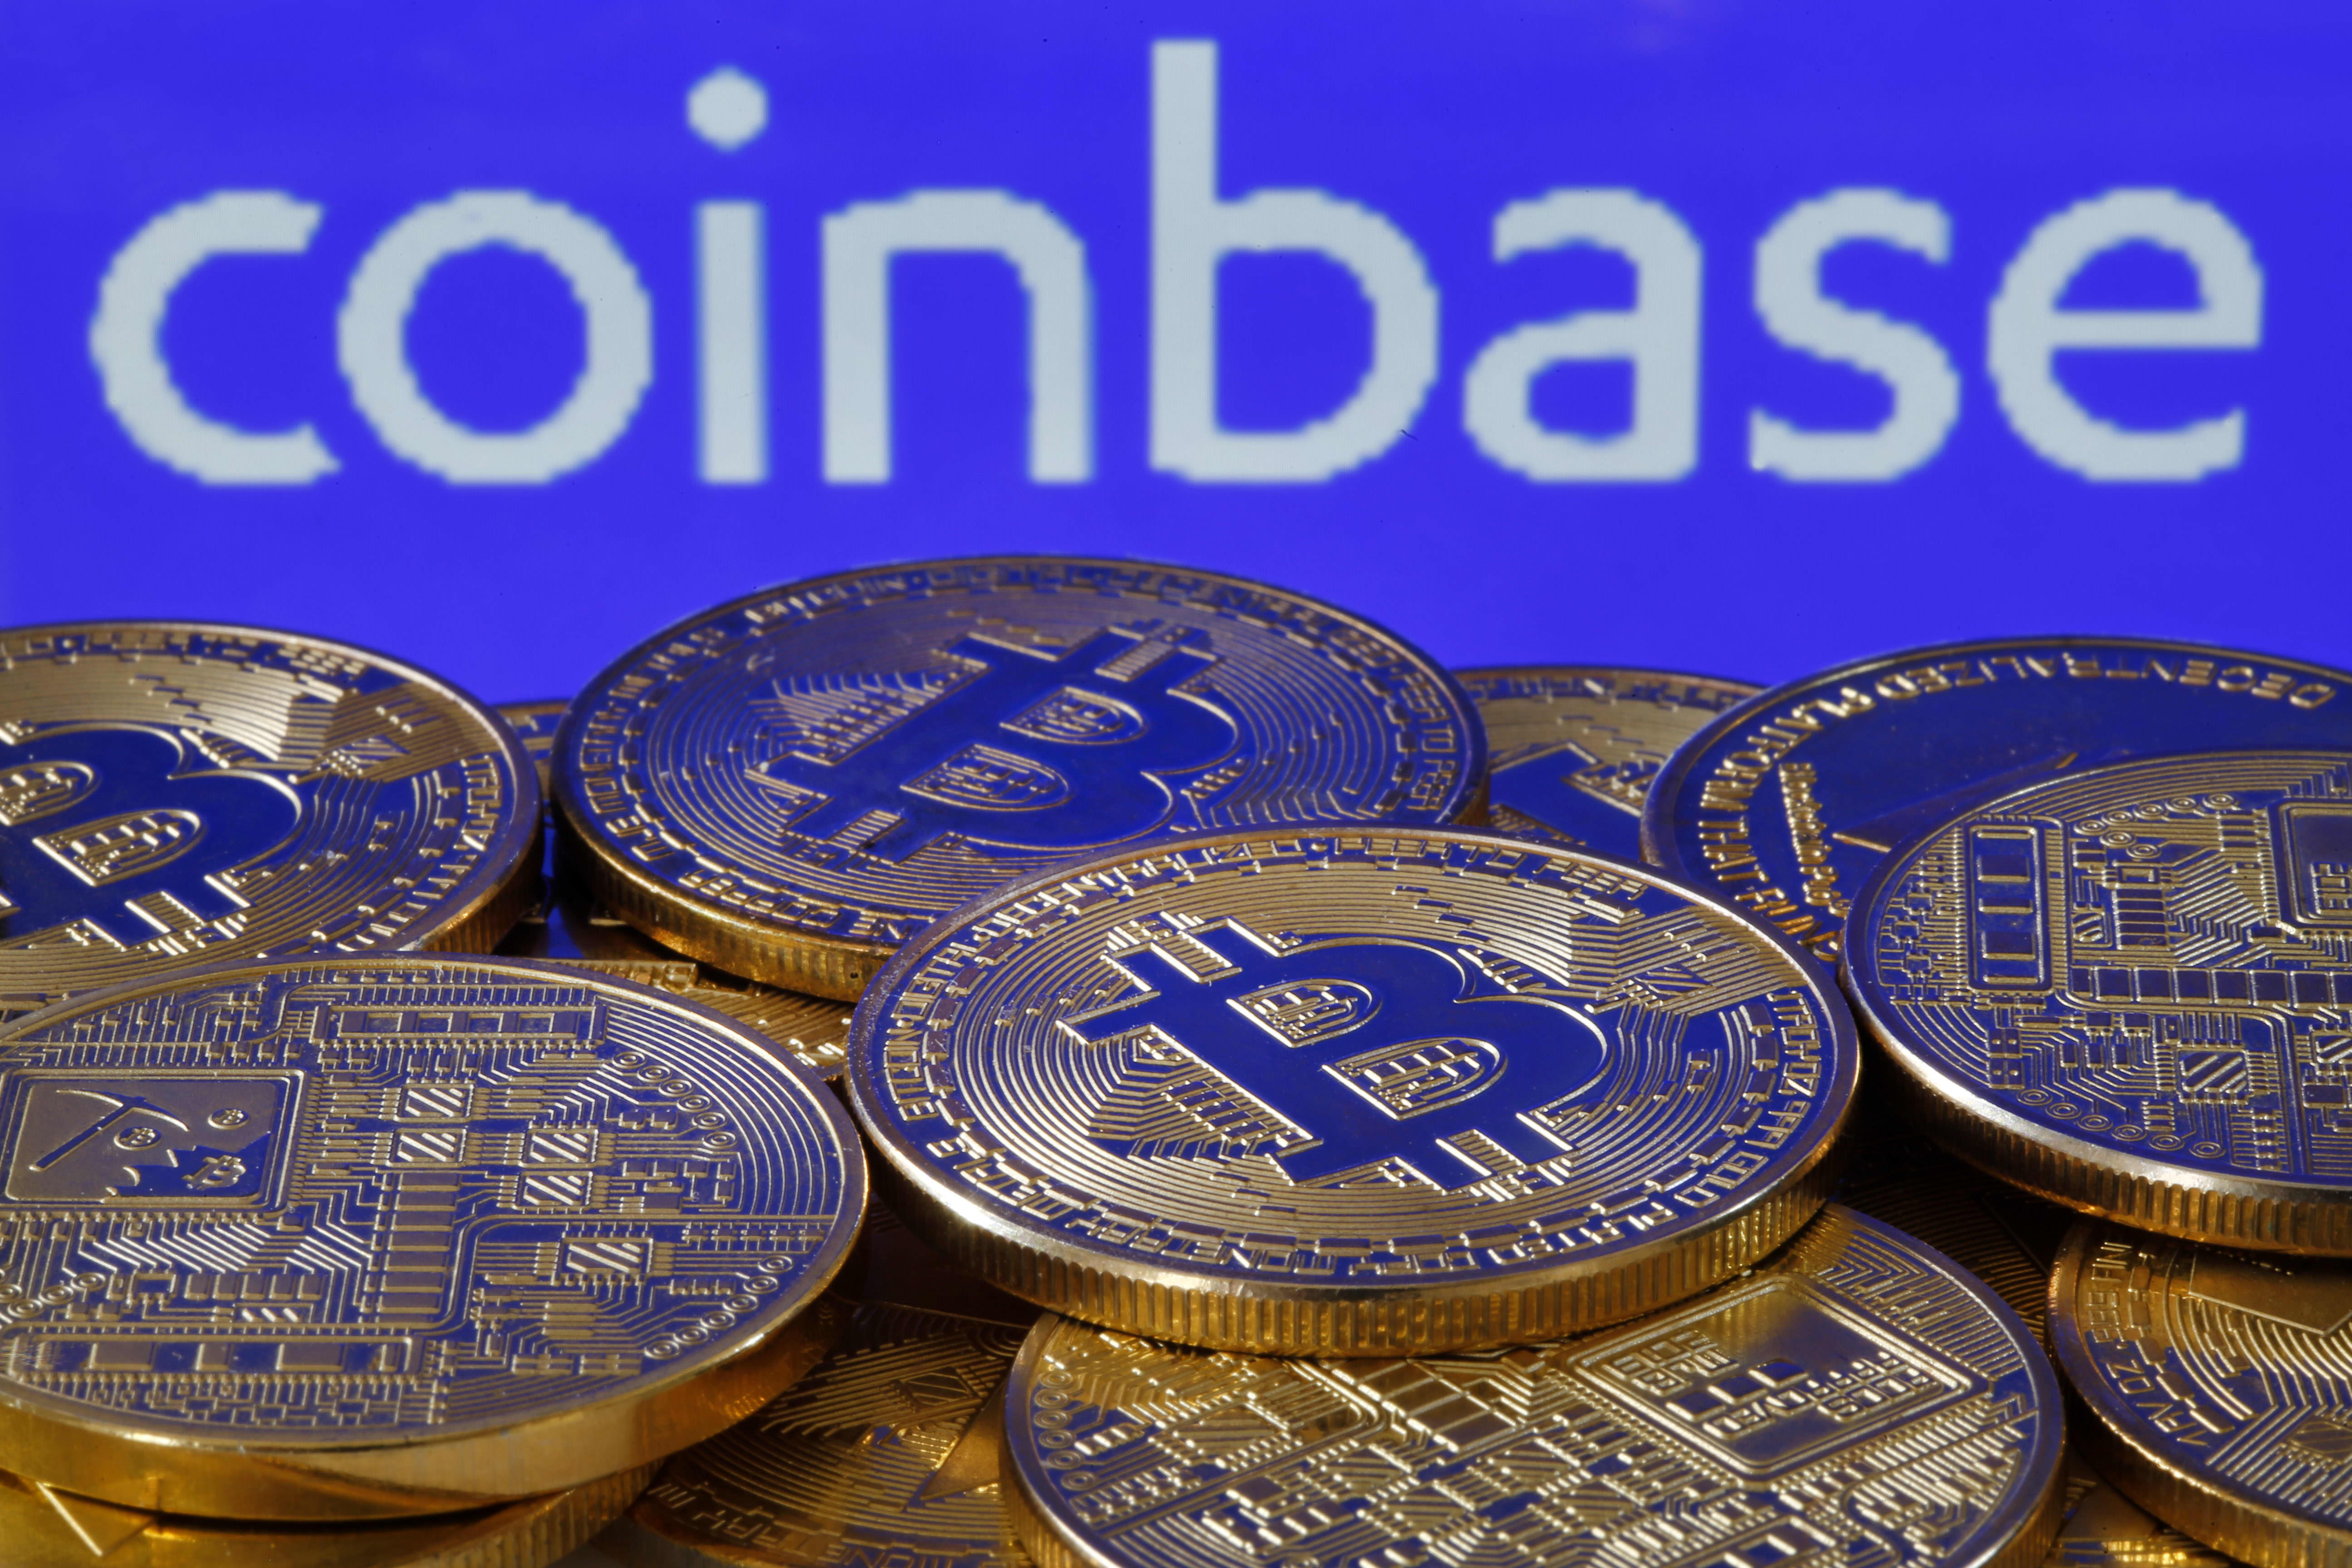 Coinbase Review 2022: Fees, Products And More